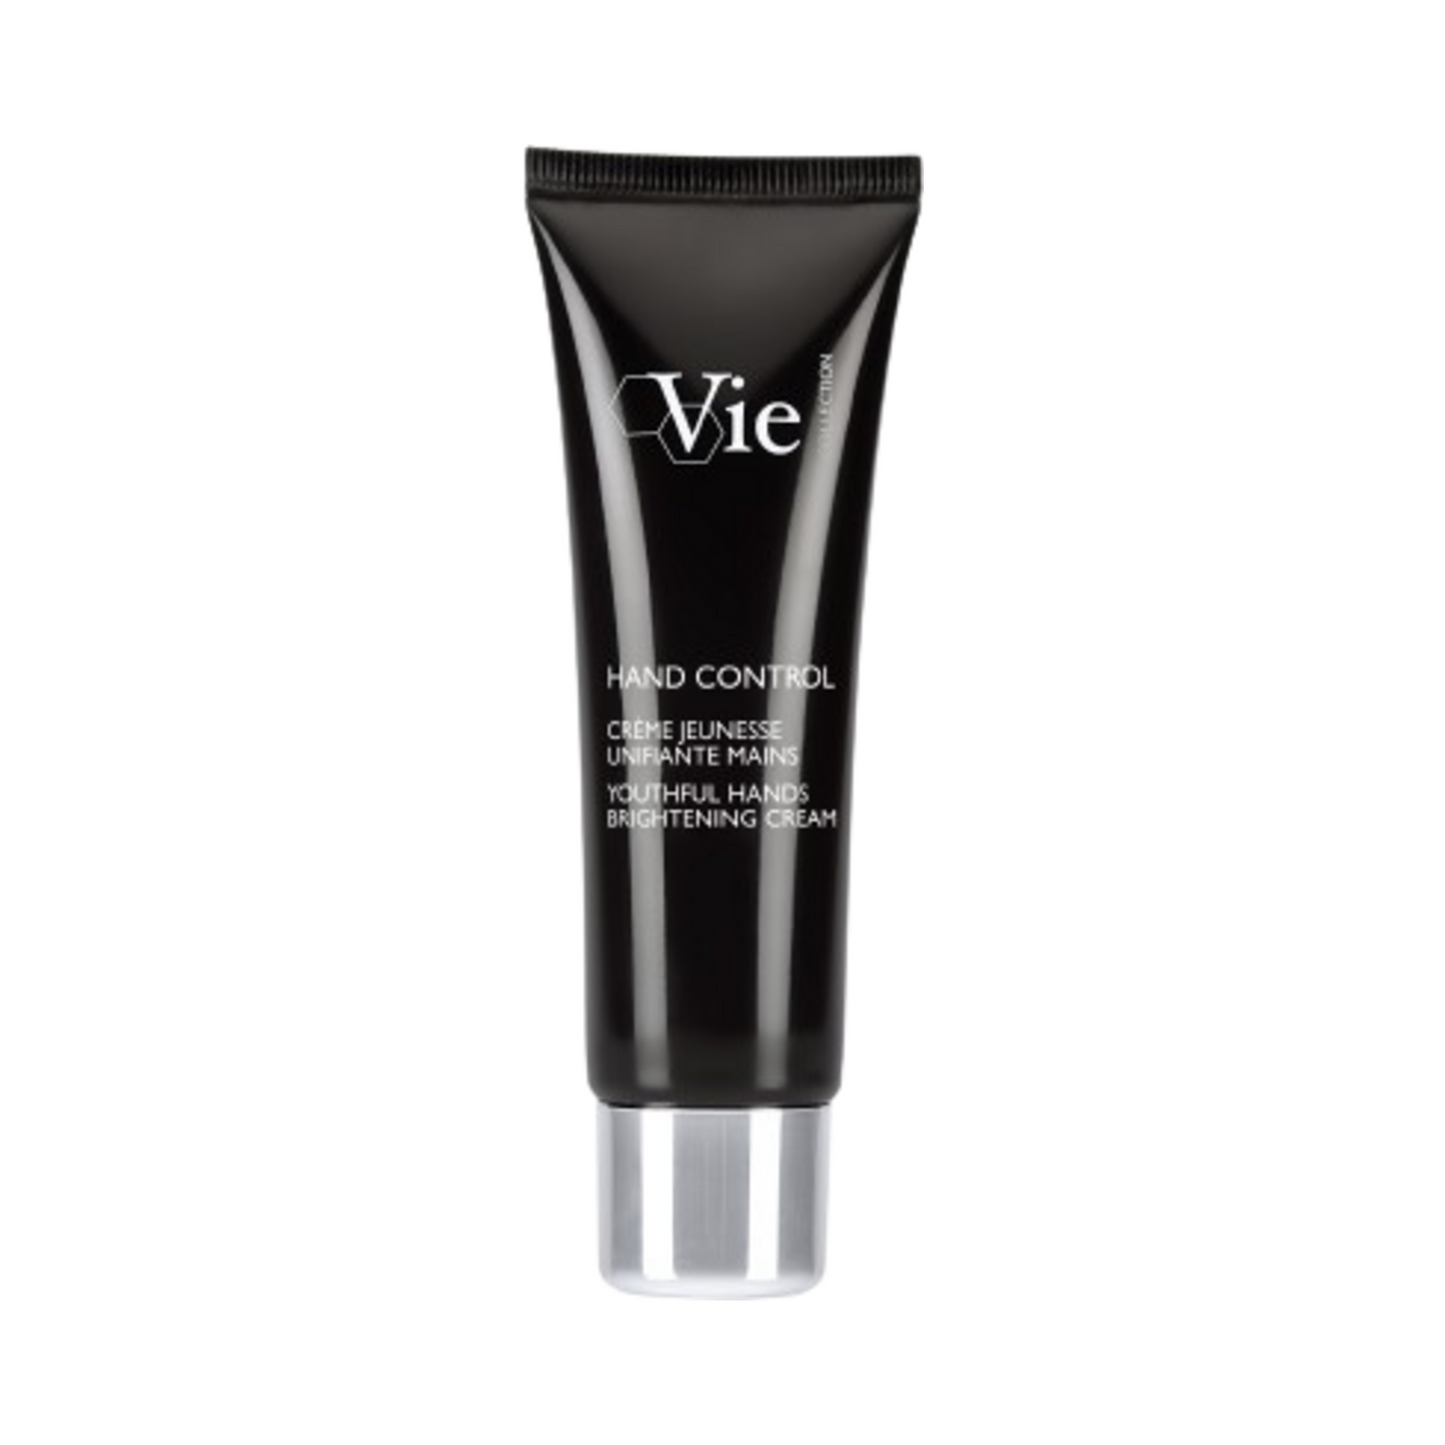 Vie Collection Hand Control Youthful Hands Brightening Cream